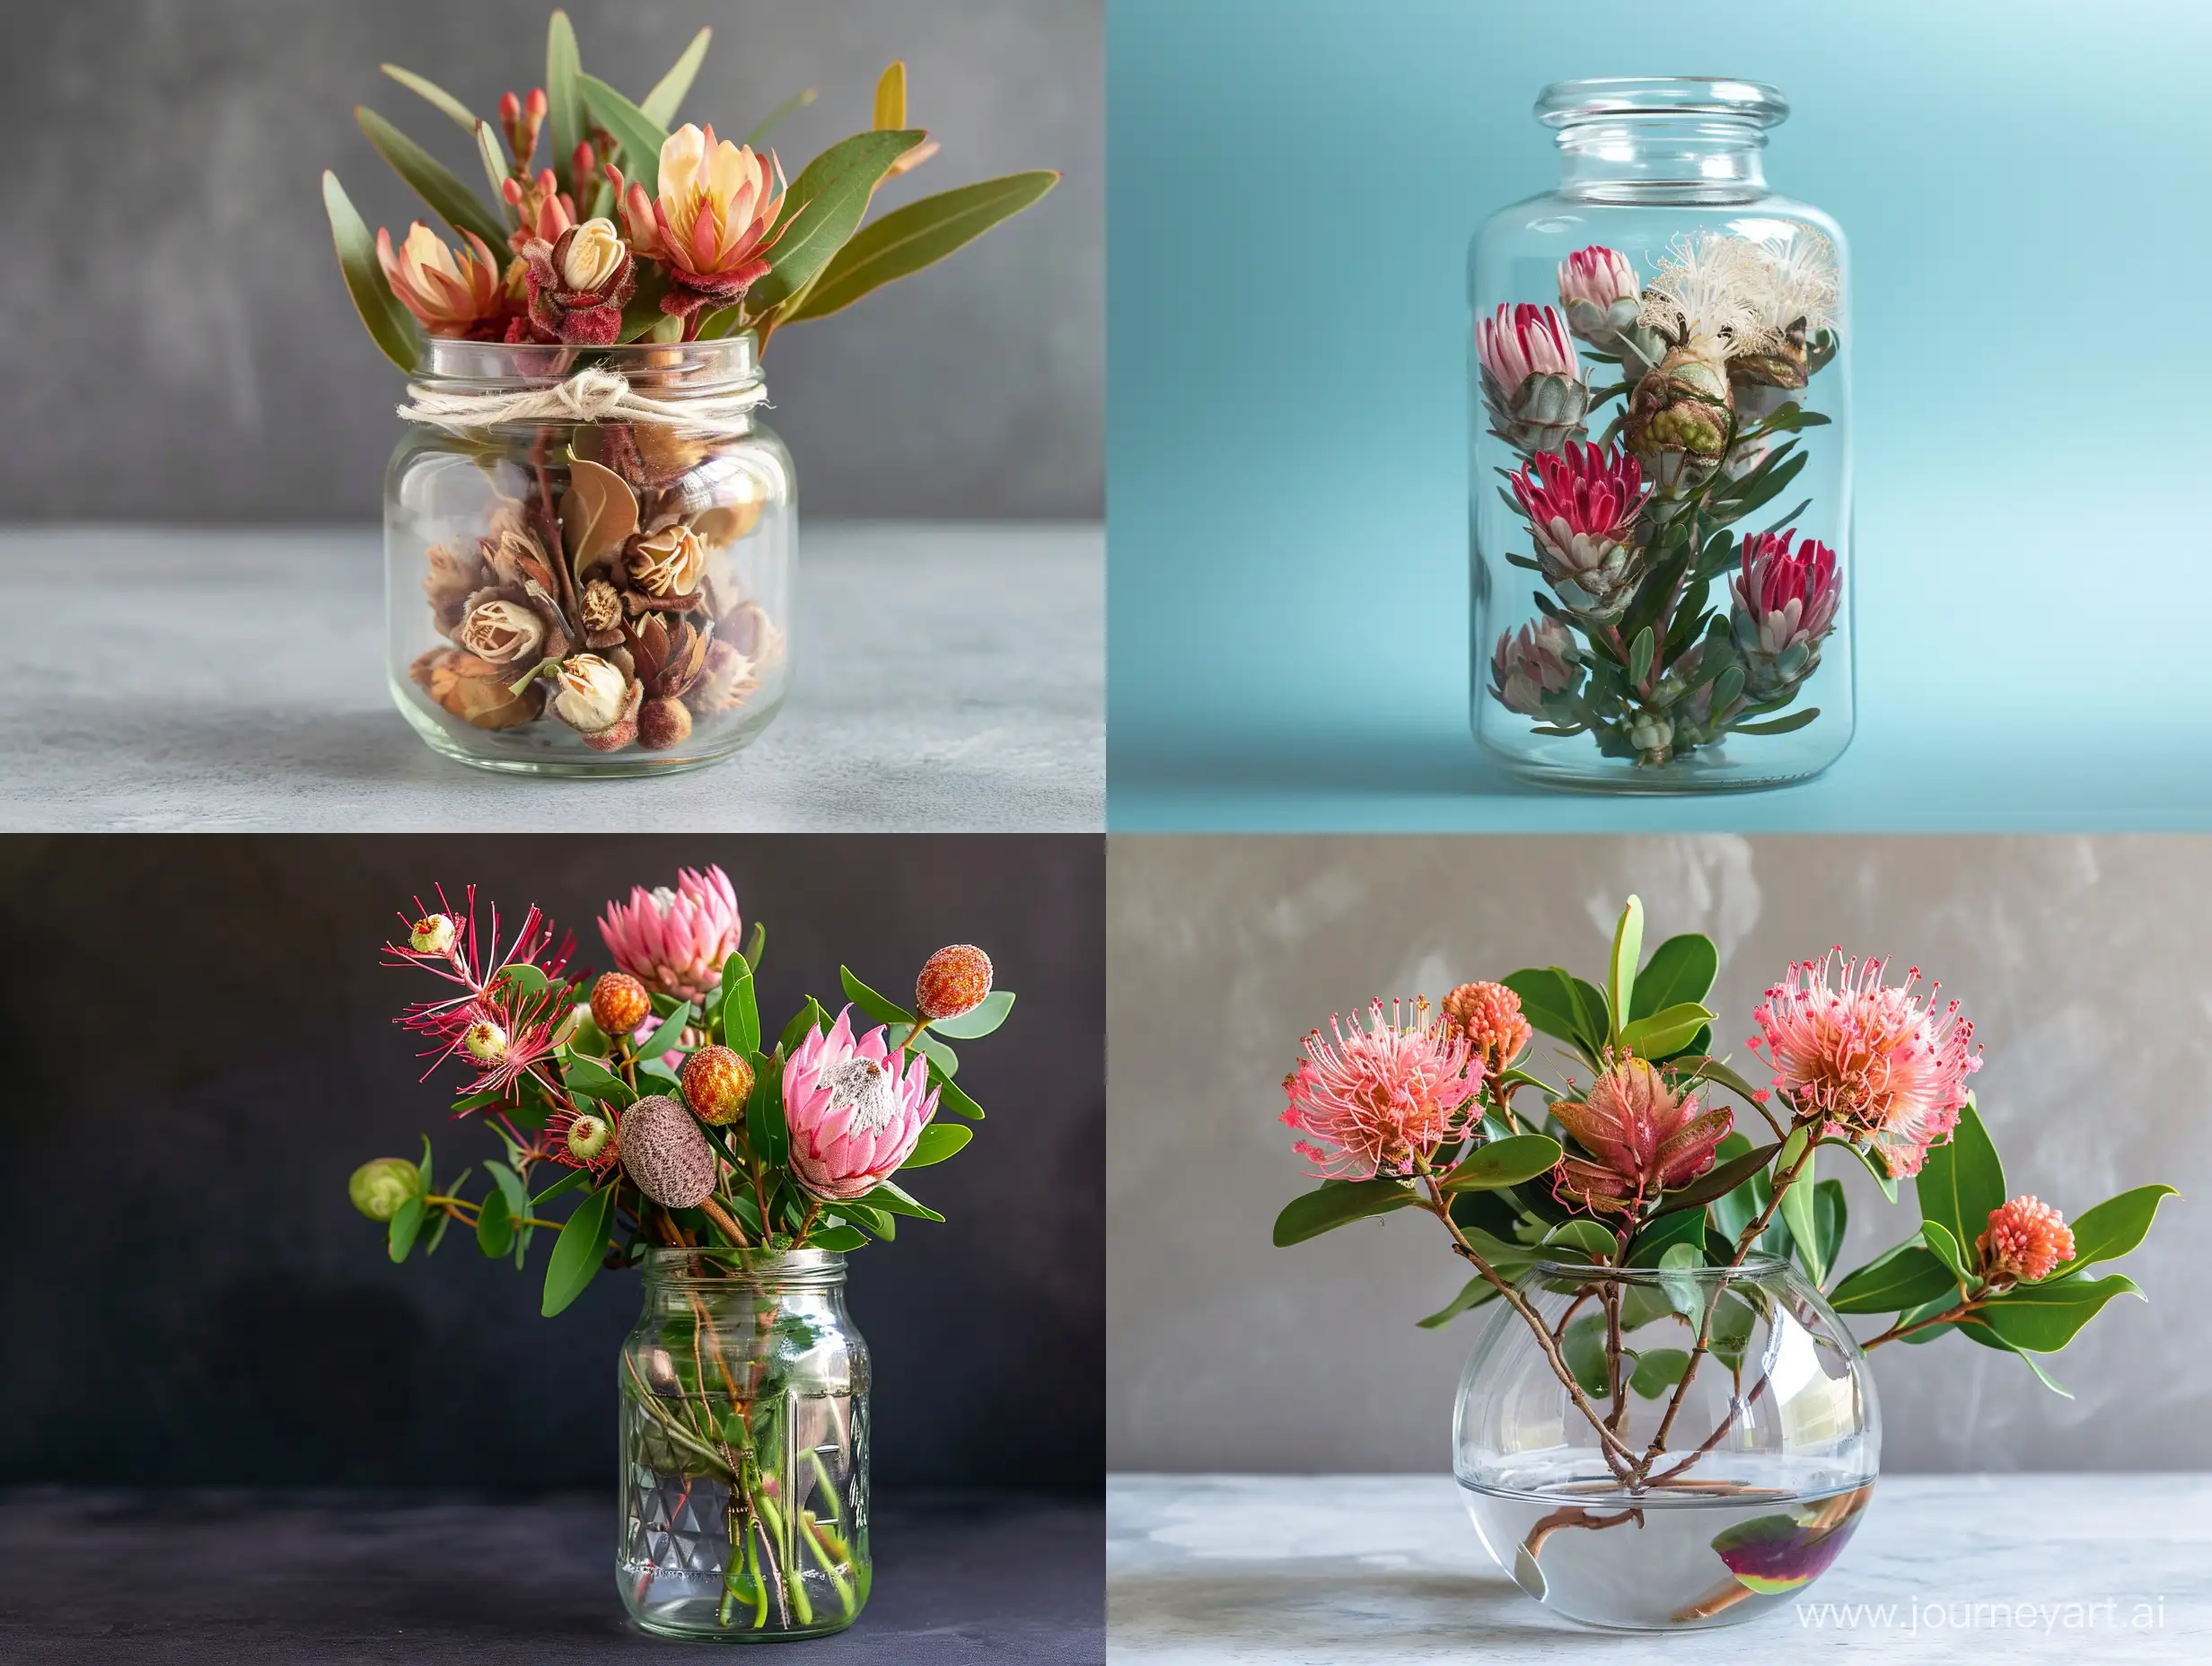 Vibrant-Red-Gum-Nut-Blossoms-in-a-Clear-Glass-Jar-Botanical-Photography